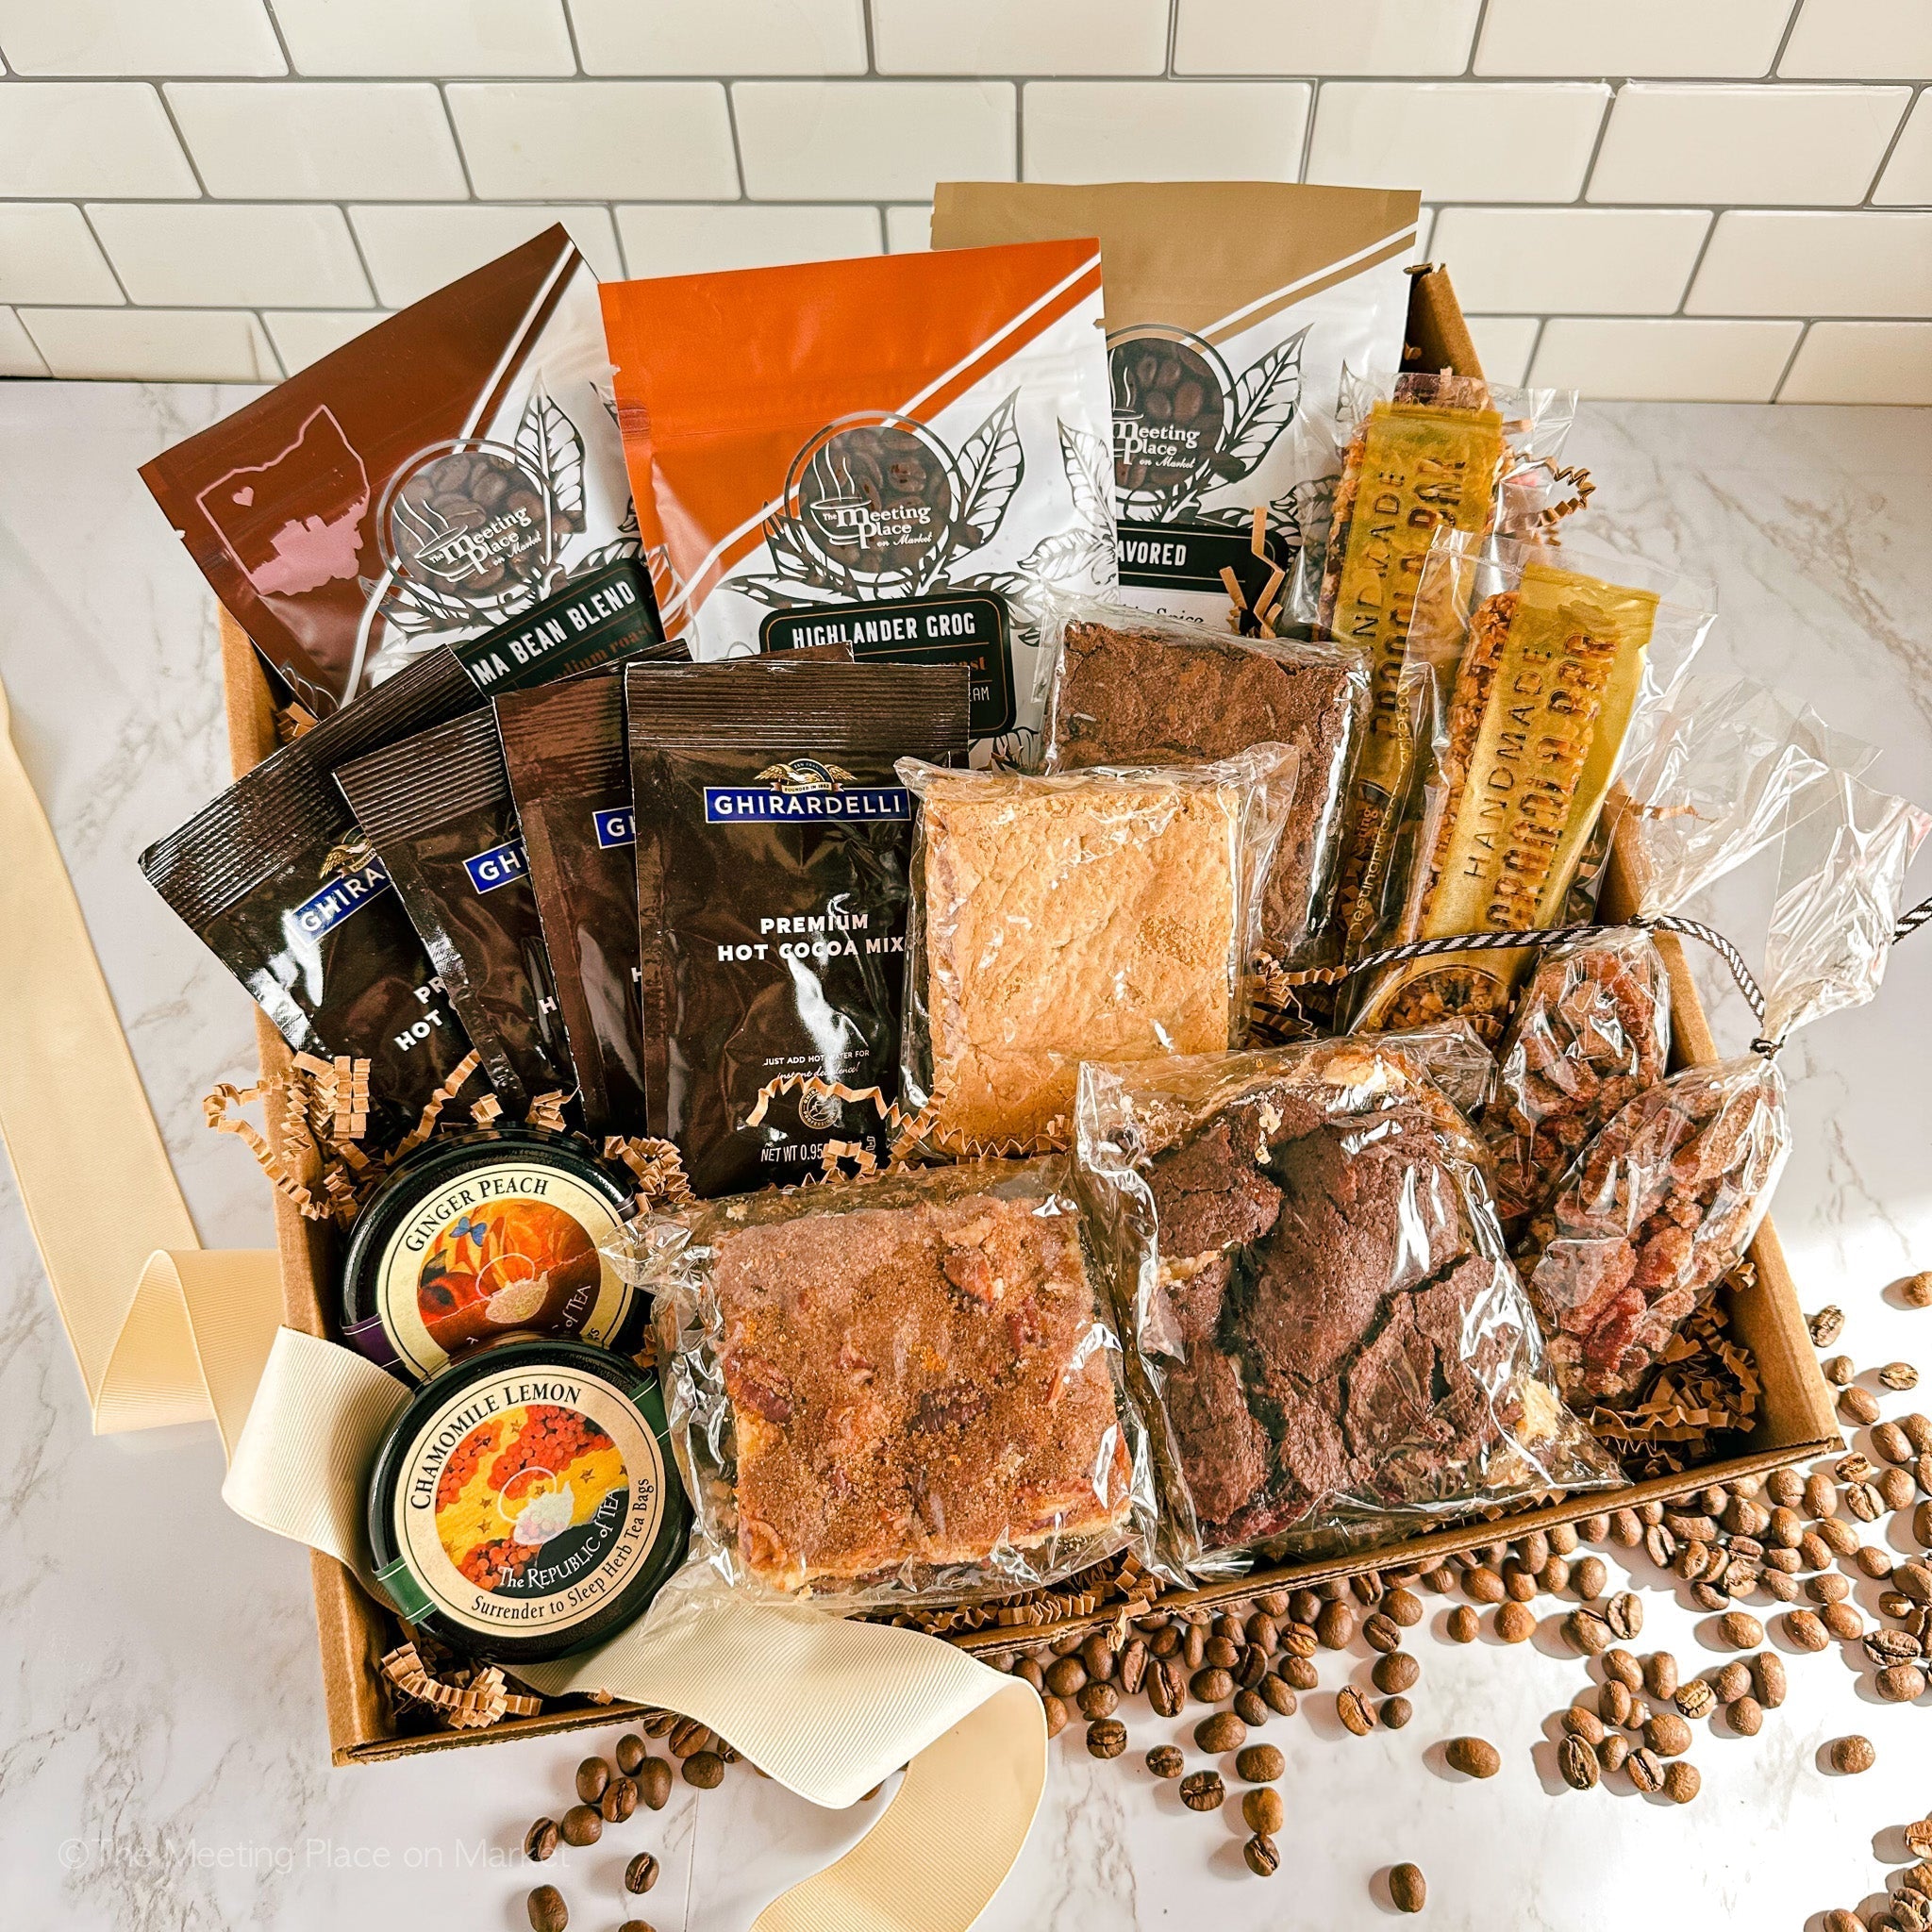 Sympathy Gift Basket with Baked Goods, Coffee, and Tea Sympathy Gift Basket - The Meeting Place on Market